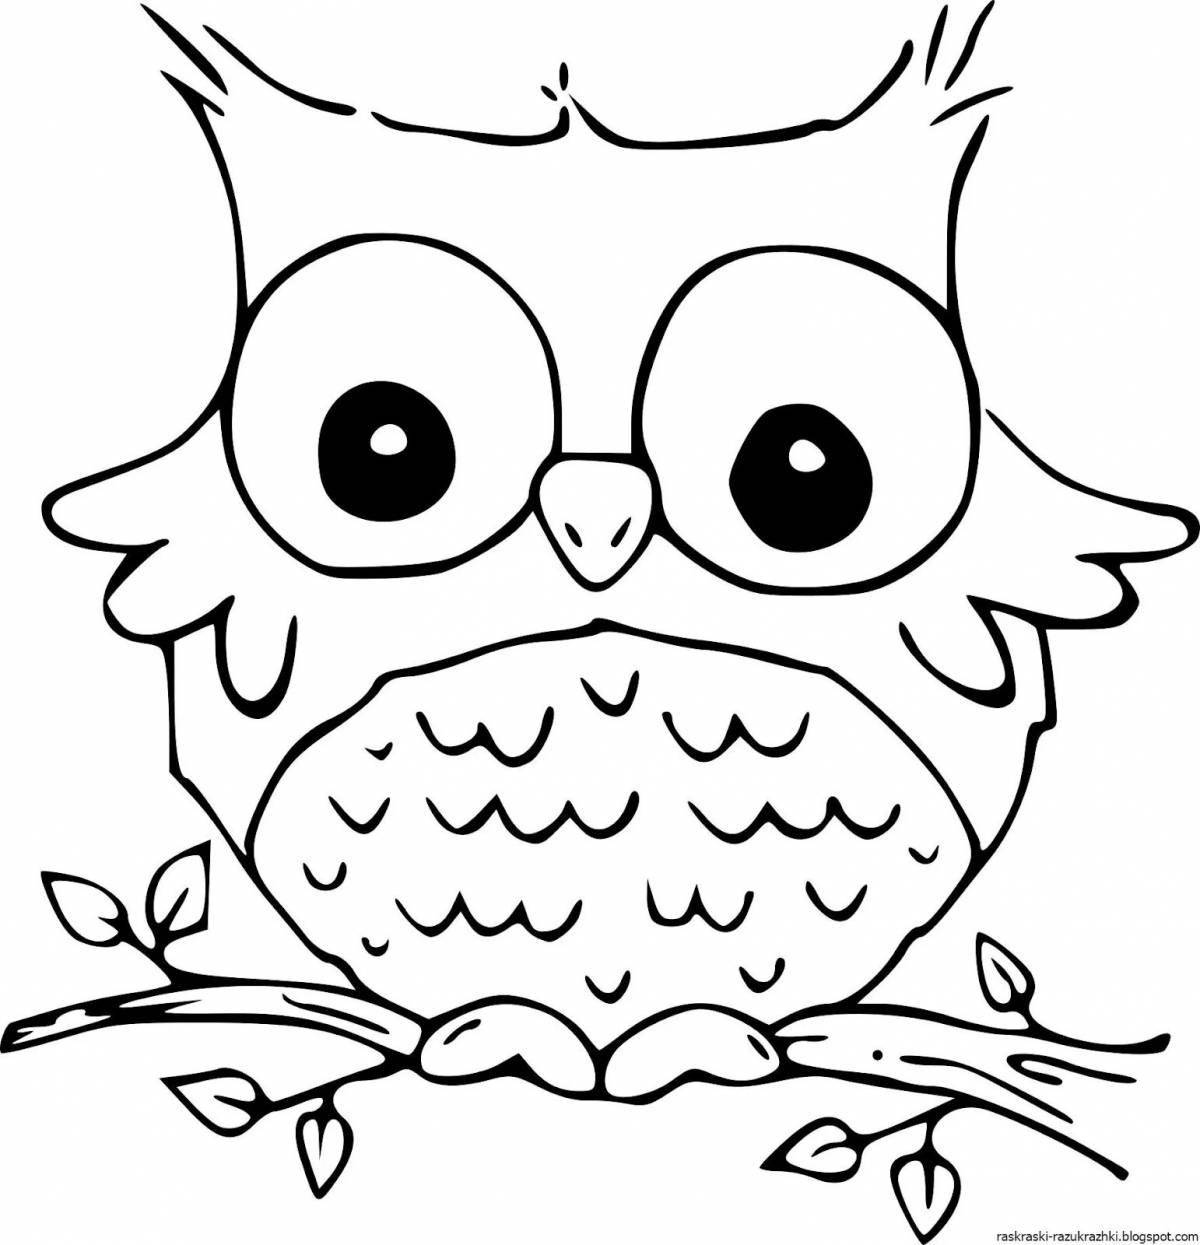 Outstanding owlet coloring page for toddlers